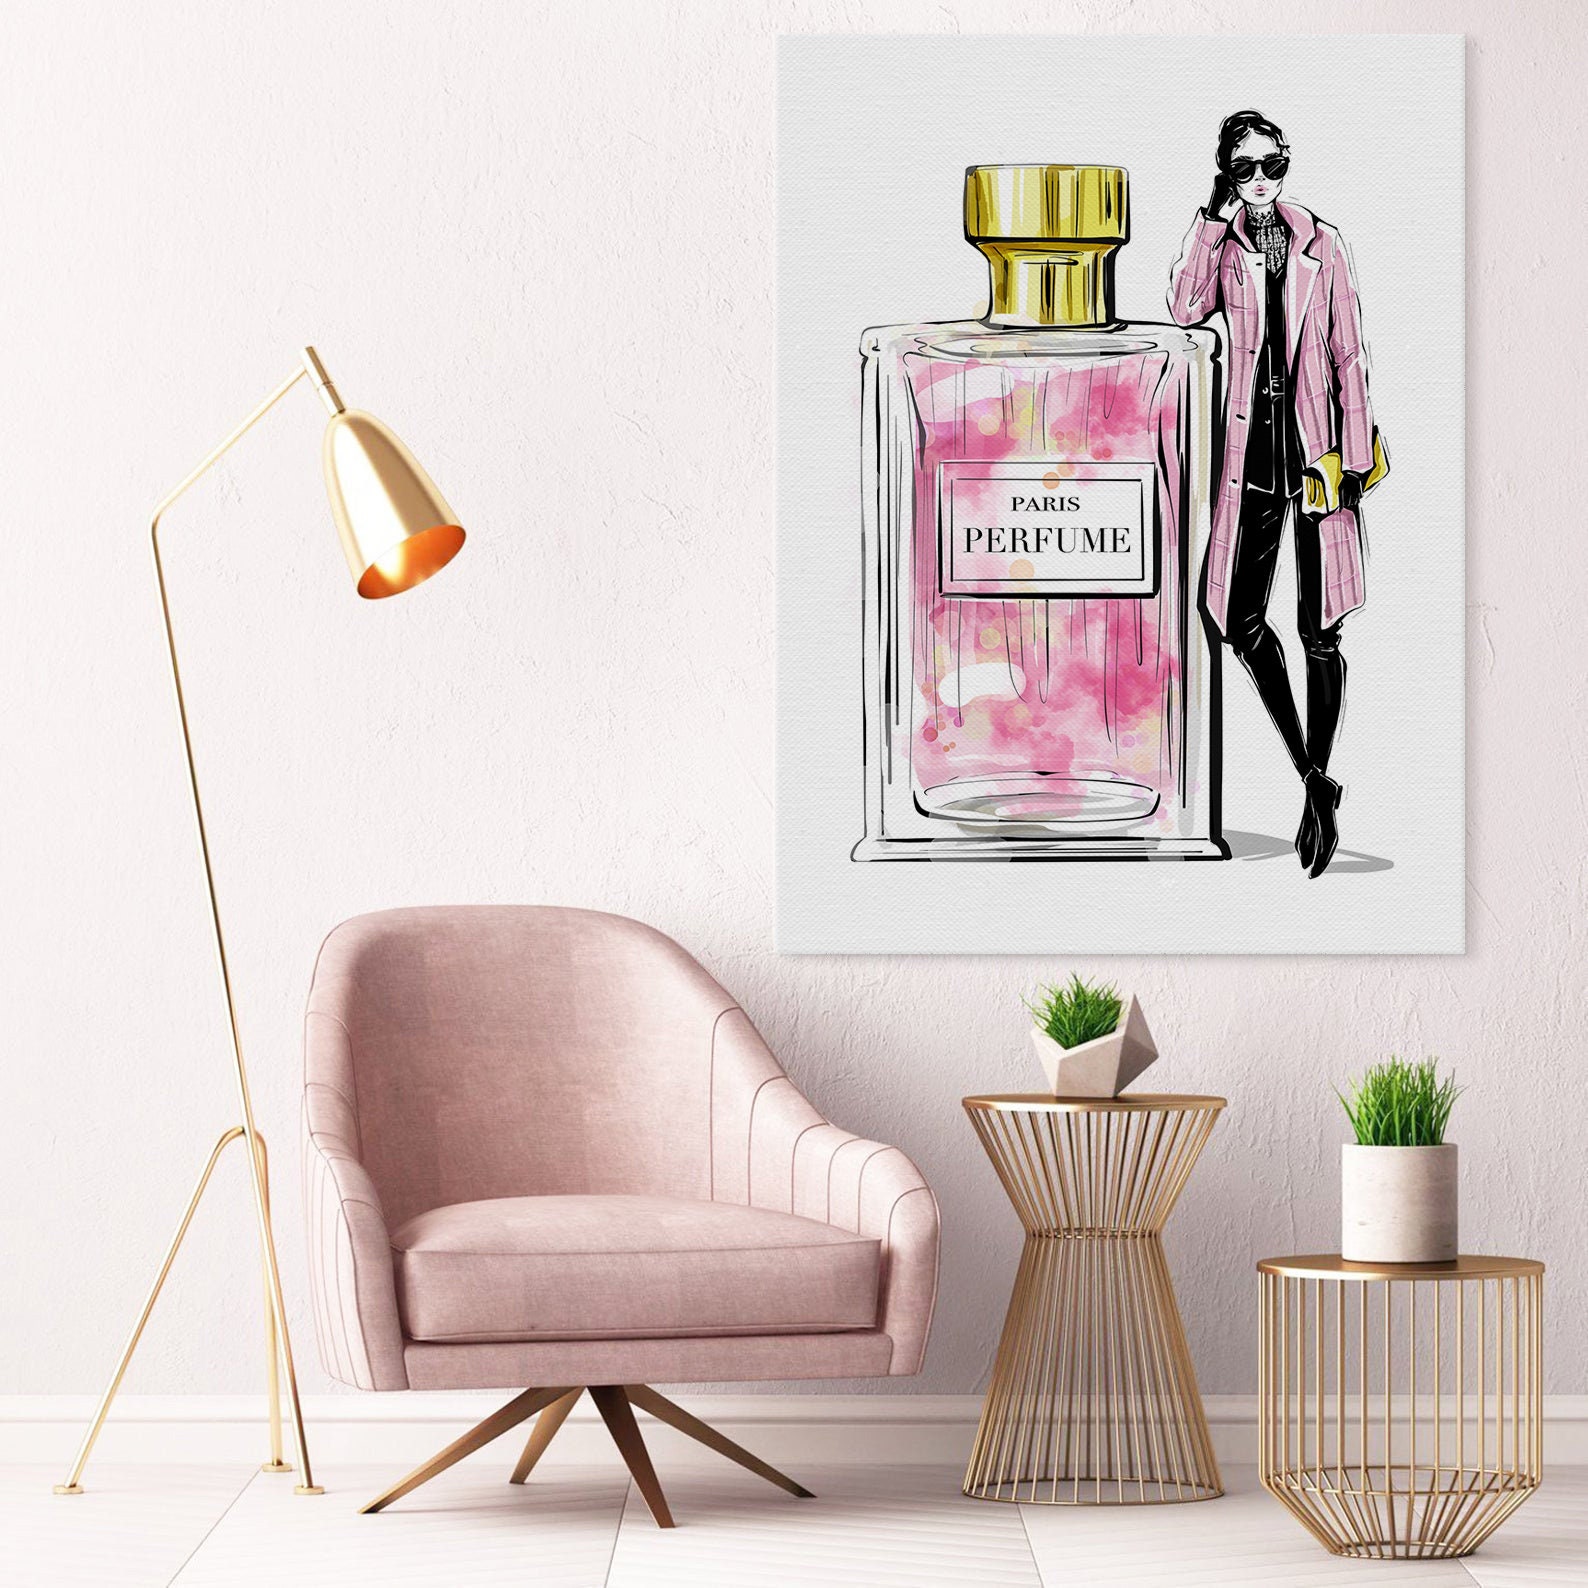  Old Perfume Bottle Fashion and Glam Wall Art Canvas Prints  Paris - Vintage - Fashion Black & White Perfumes Home Décor, Bedroom Decor  for Women Girls 24x36inch(60x90cm): Posters & Prints